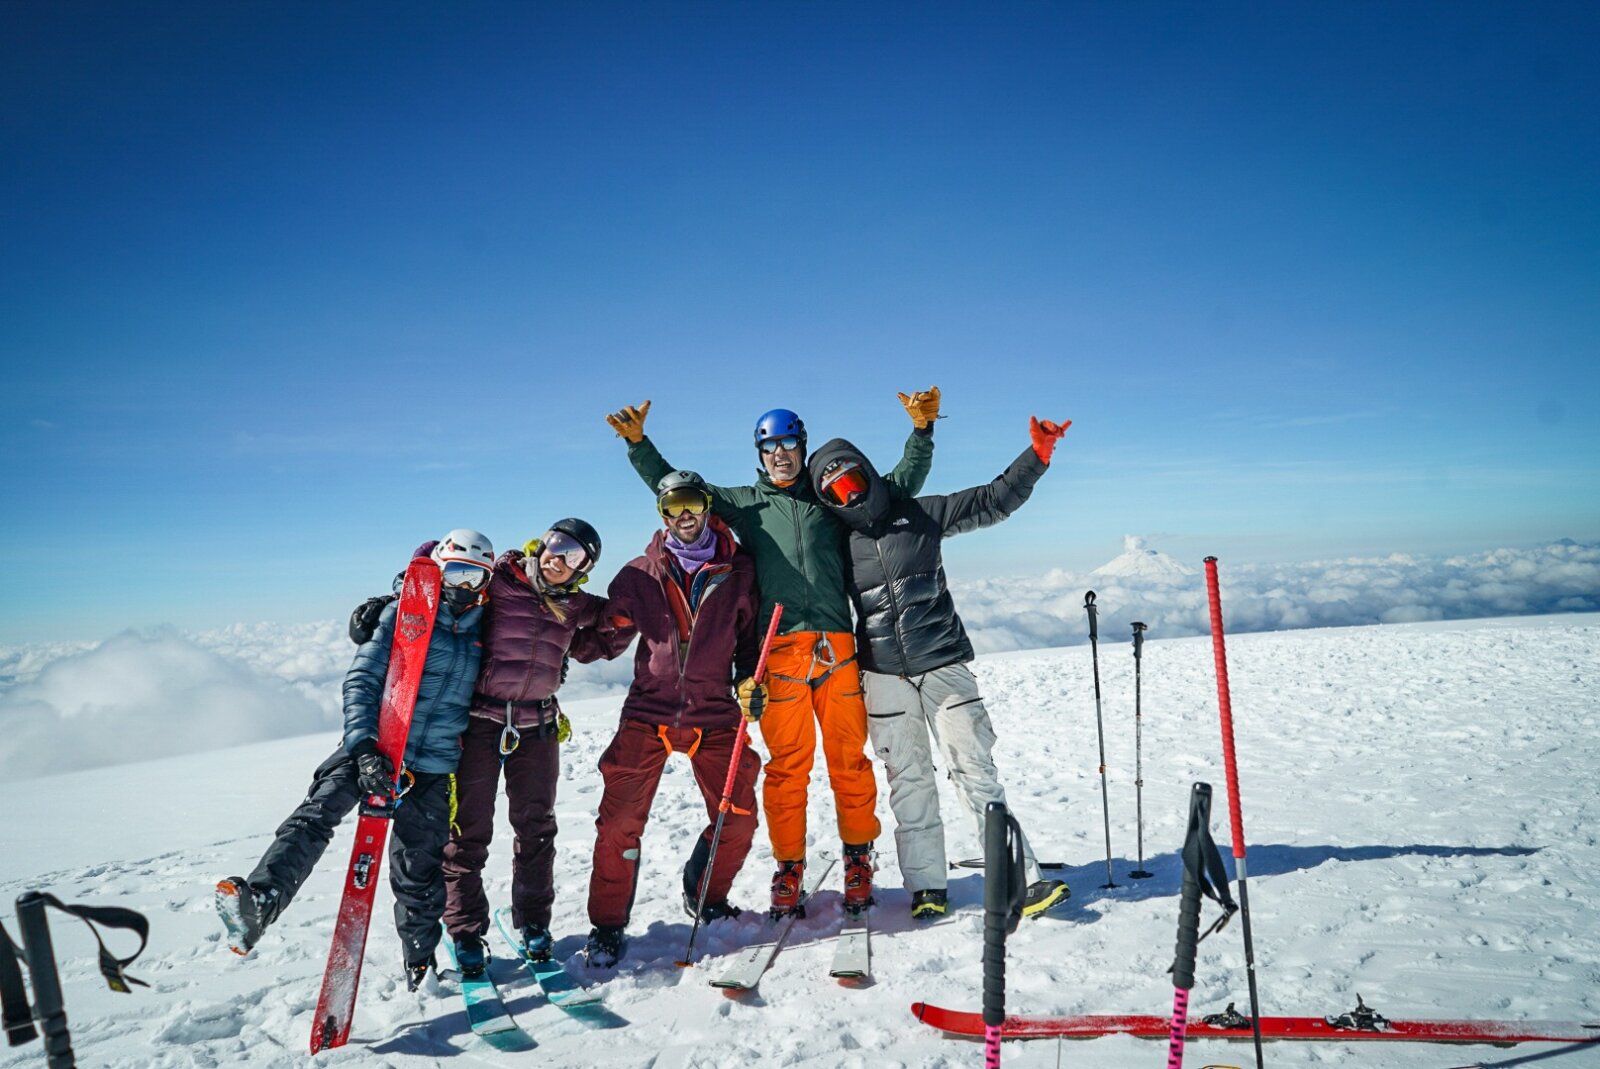 Professionally guided ski mountaineering trips to the volcanoes of Ecuador. Backcountry skiing in ecuador, ski ecuador, ski volcanoes, ecuador skiing, ski expedition, backcountry ski expedition, ecuador ski trip, guided ski trip, guided ski expedition, guided skiing in ecuador